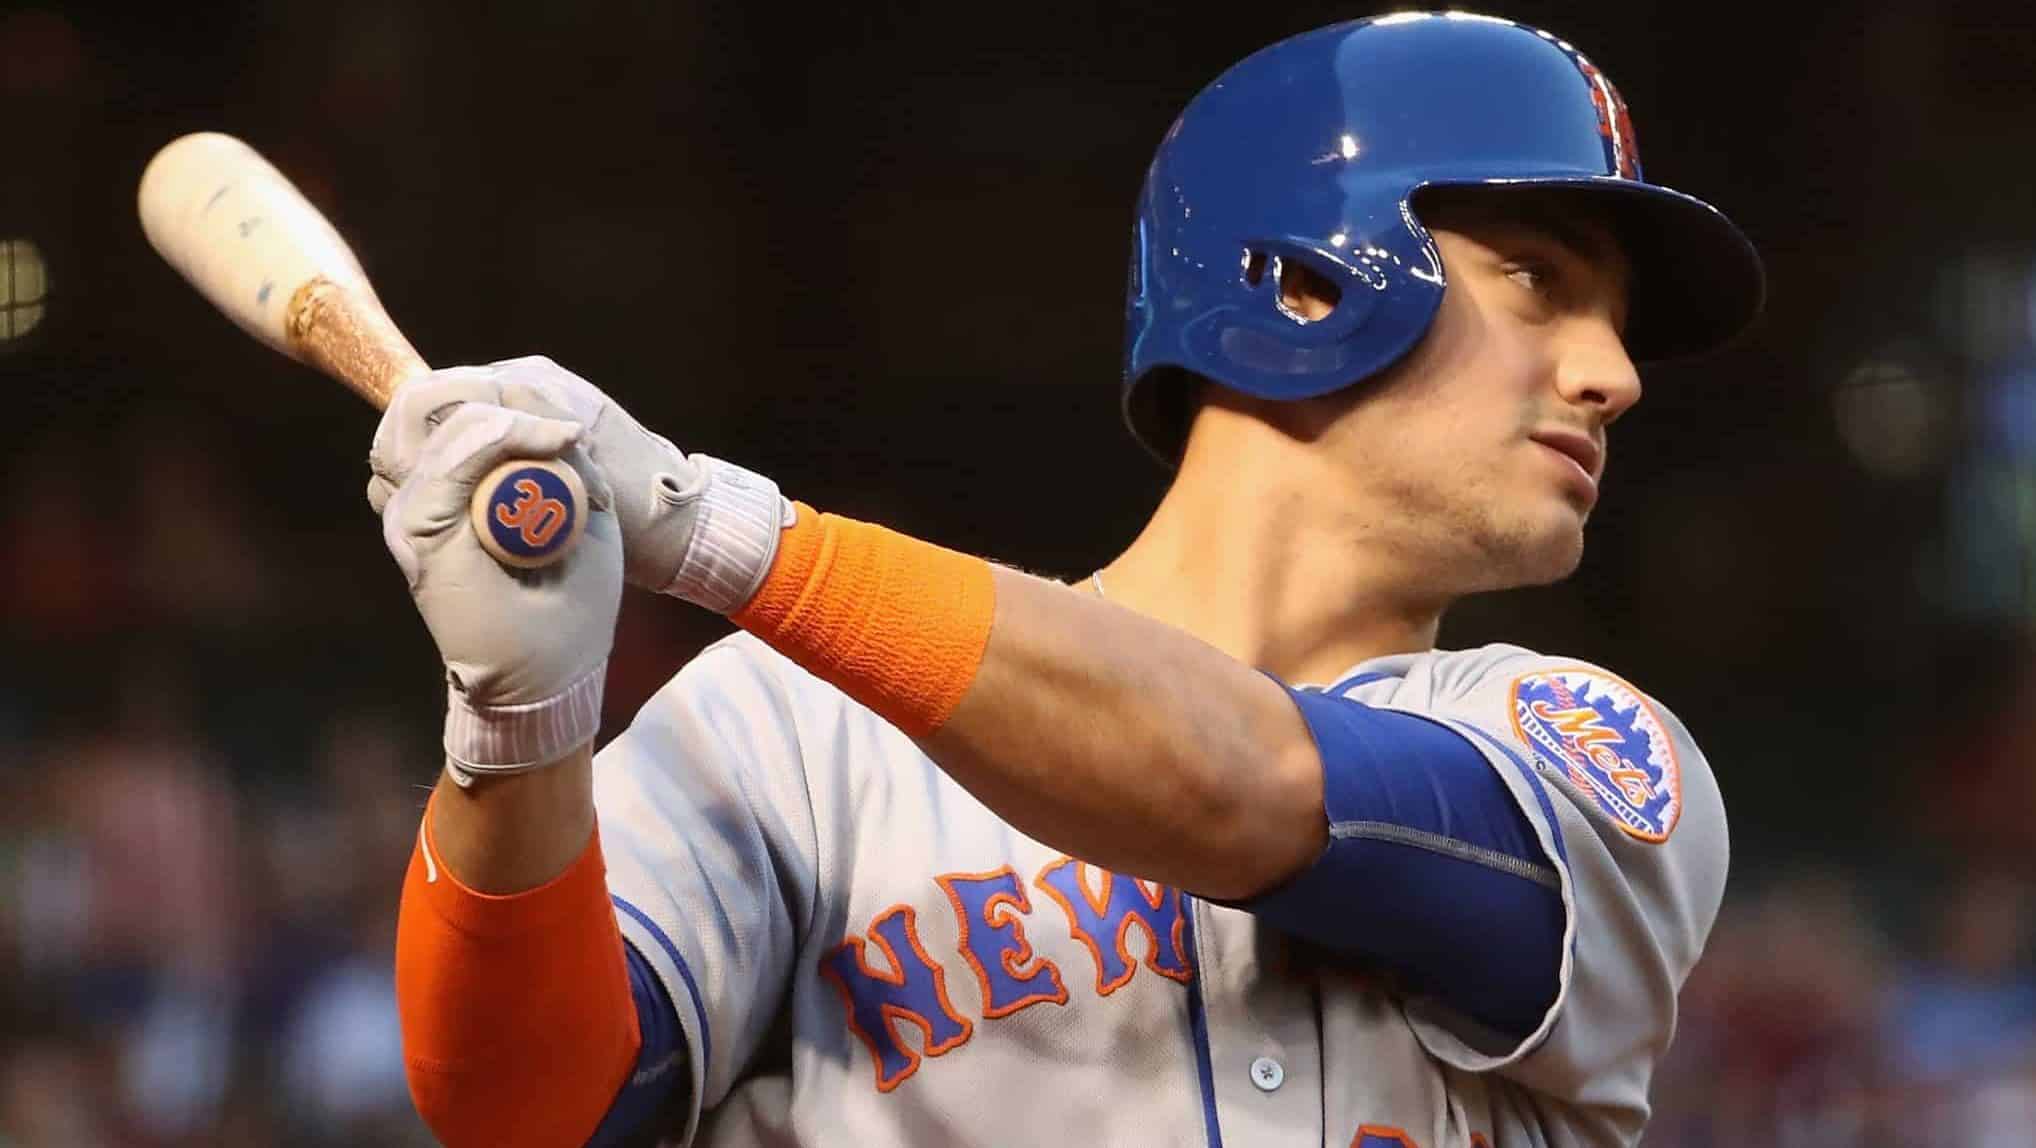 Mets' Conforto: We'd never cheat like the Astros did